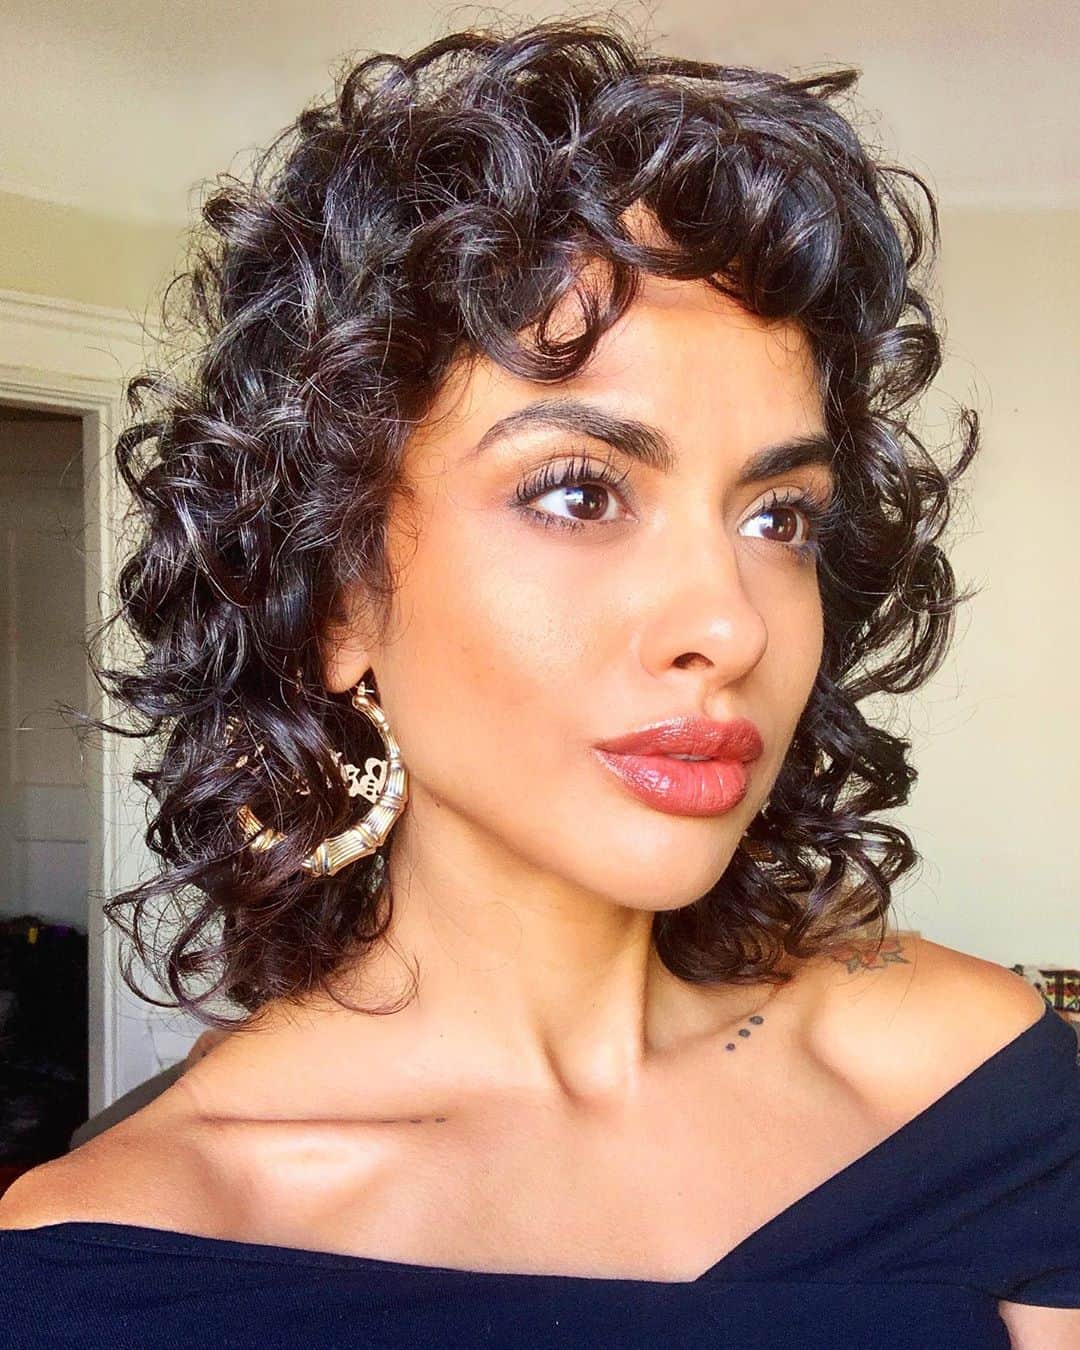 20 Perfect Looks For Short Curly Hair - StylesRant